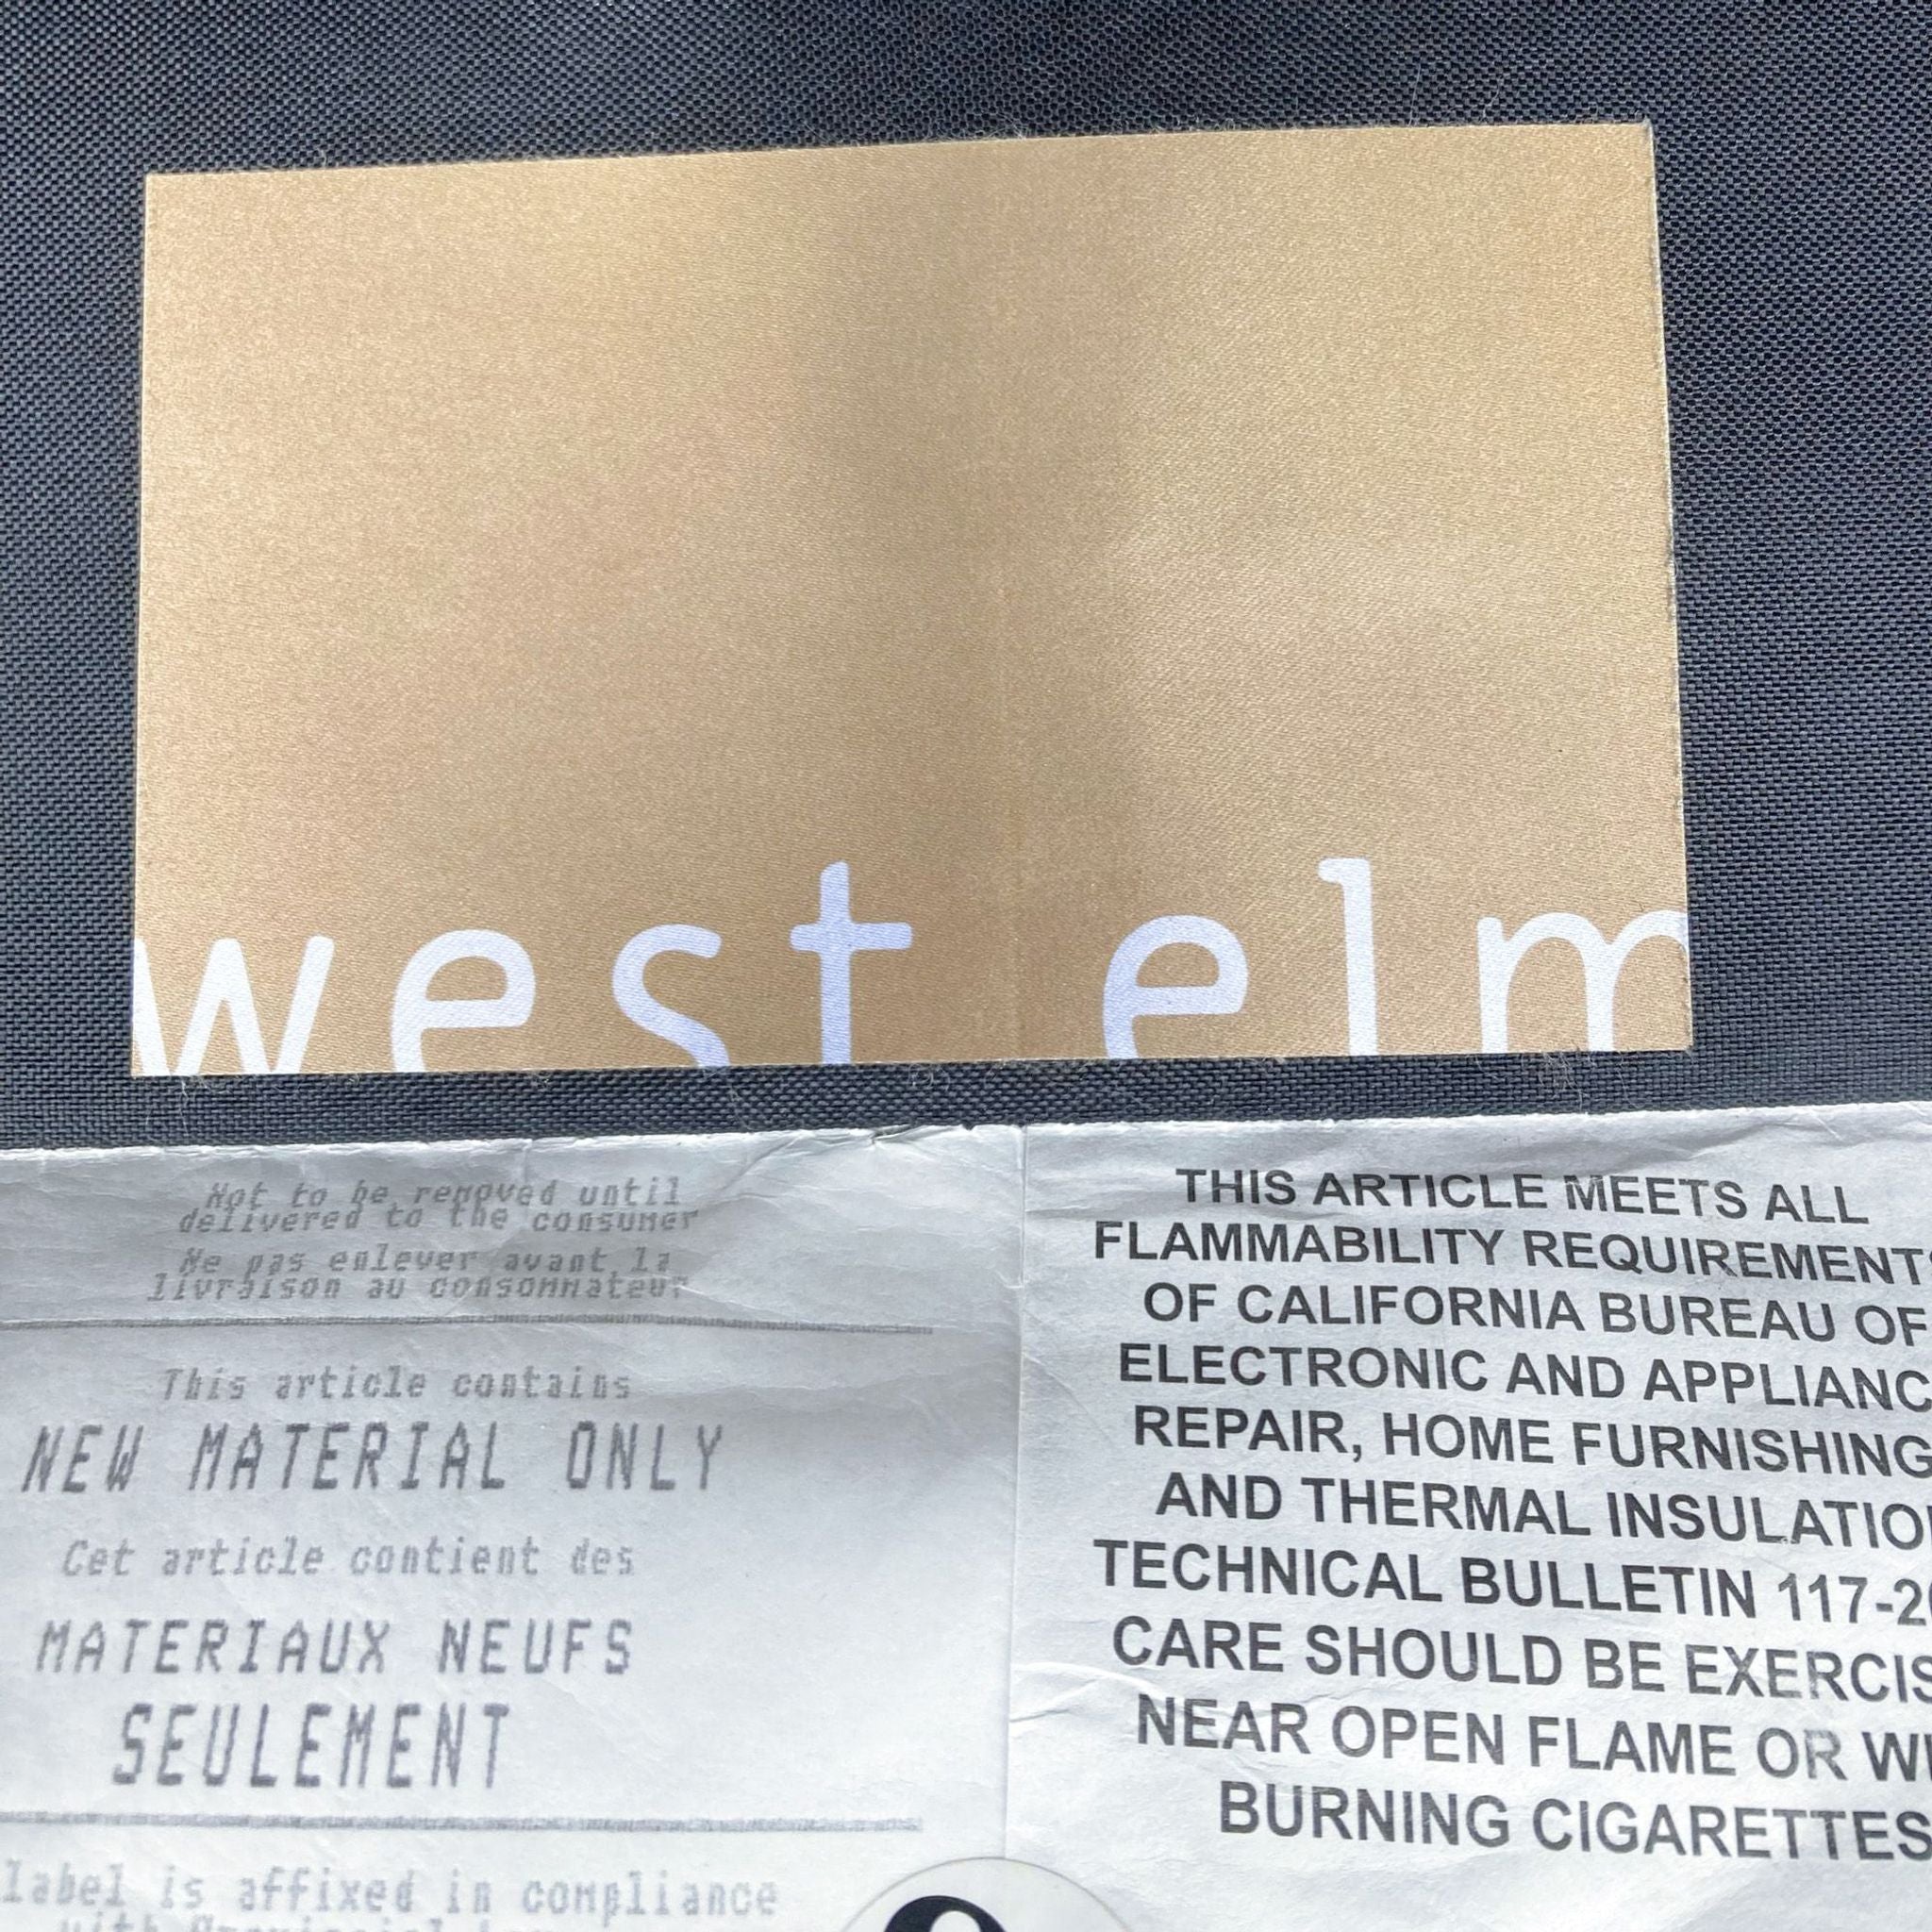 Brand label of West Elm on a linen weave fabric, indicating new material and flammability requirements.